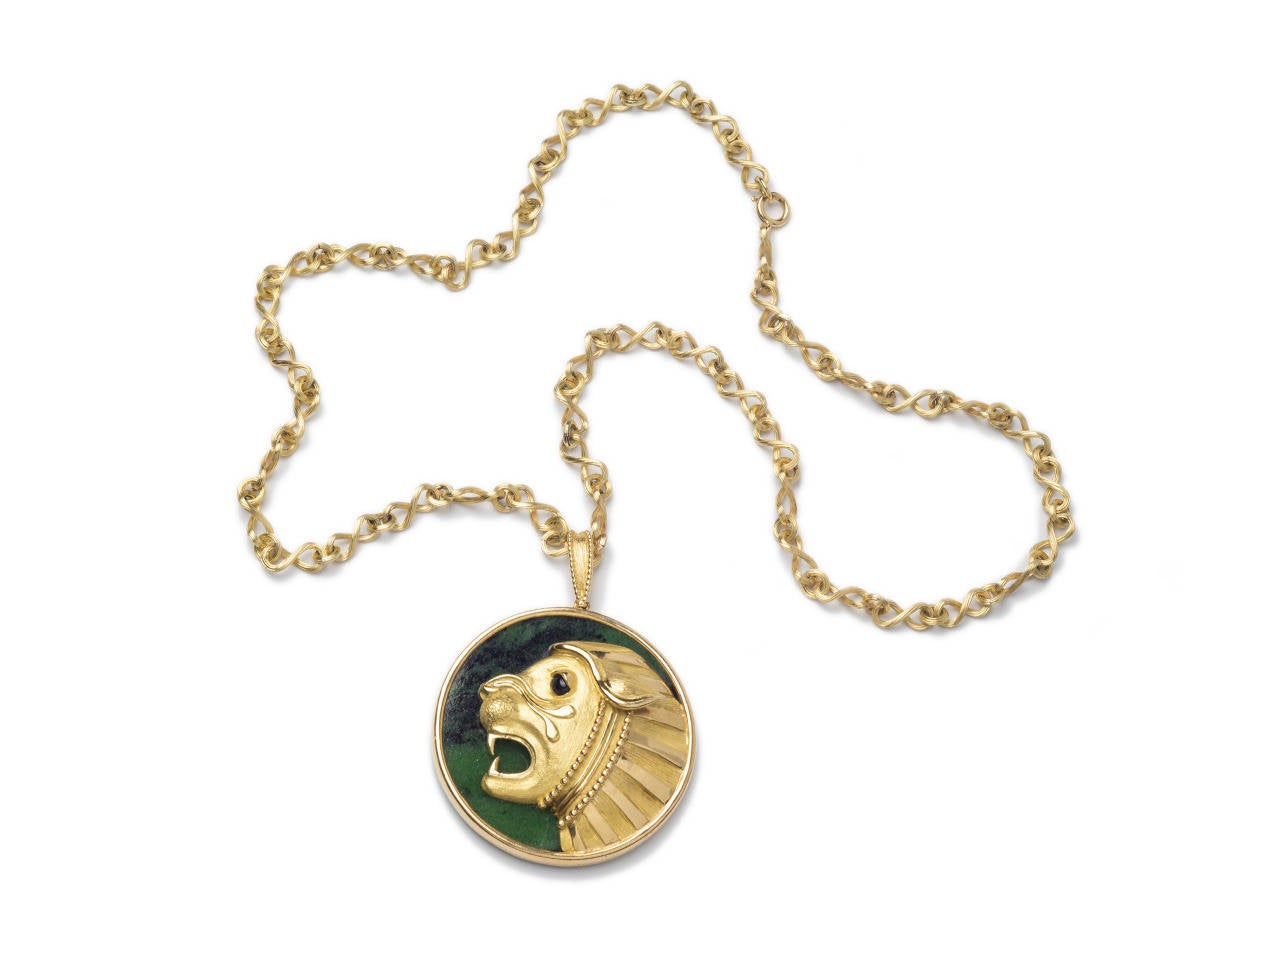 18 K gold pendant necklace. Pendant has malachite plaque with stylized gold lion in high relief, suspended from 24 inch 18k gold link chain. Signed, MAUBOUSSIN PARIS 3960, LION 22/7-22/8.